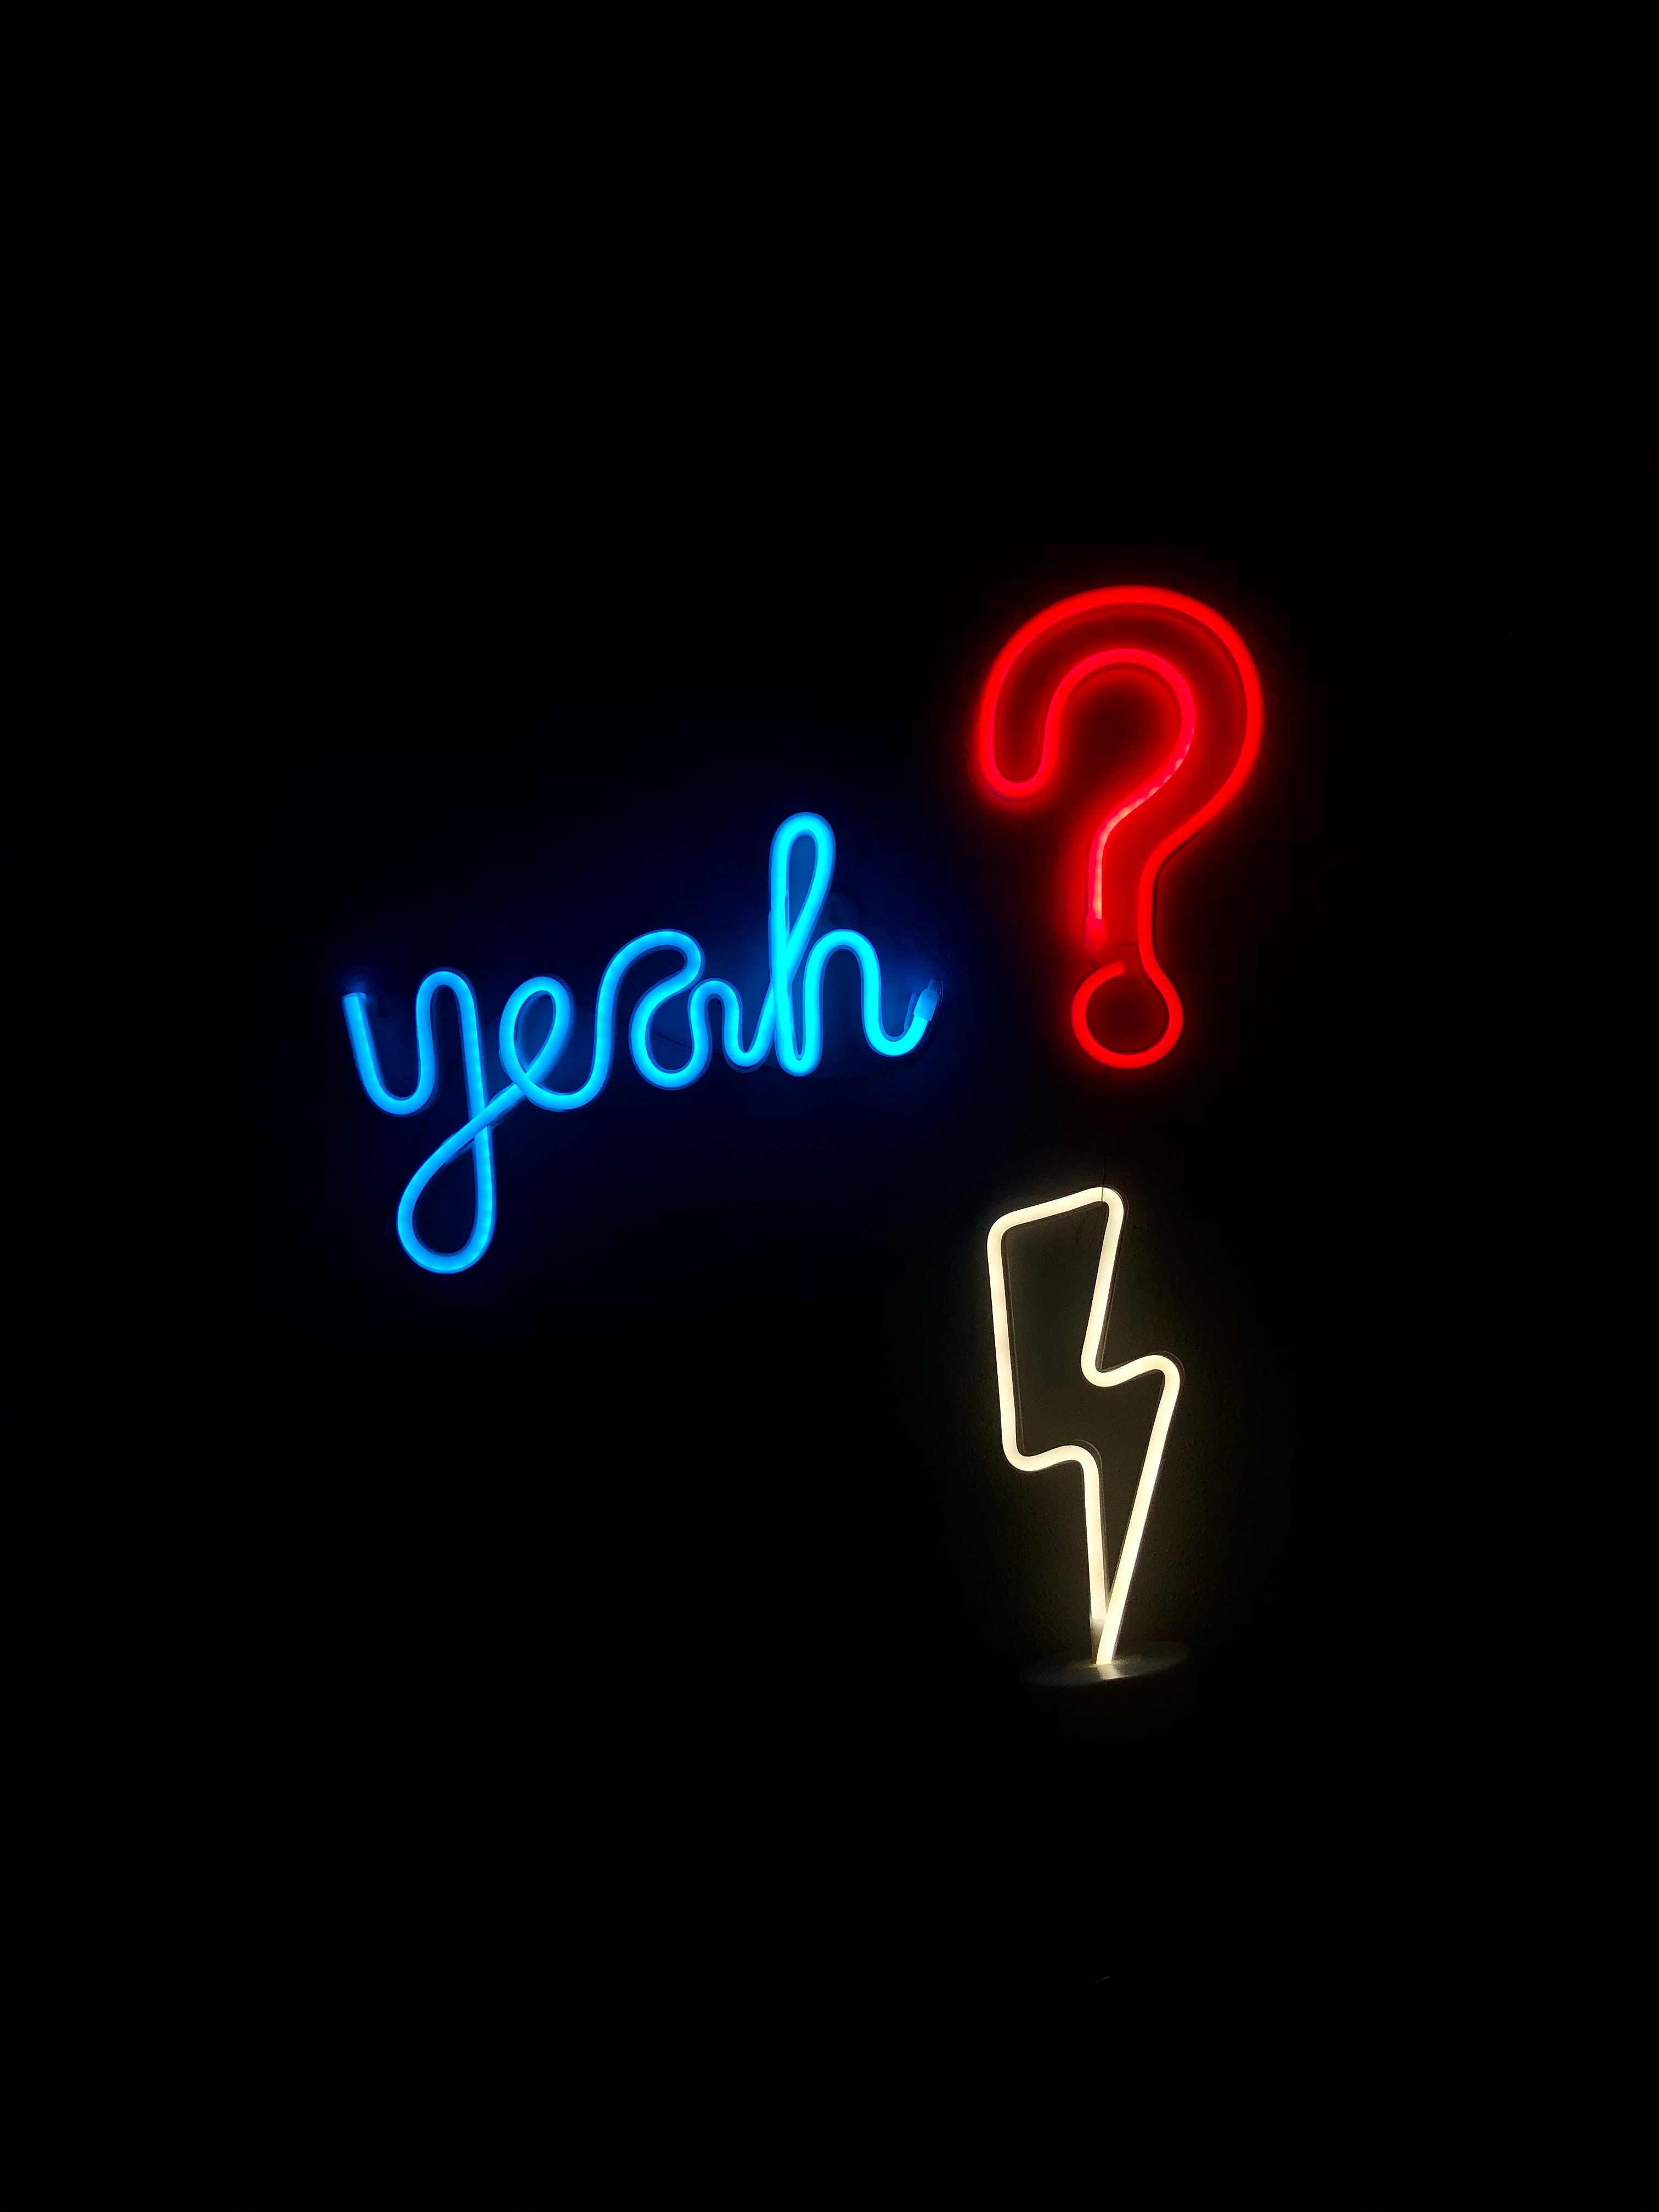 text, words, neon, darkness, glow, question